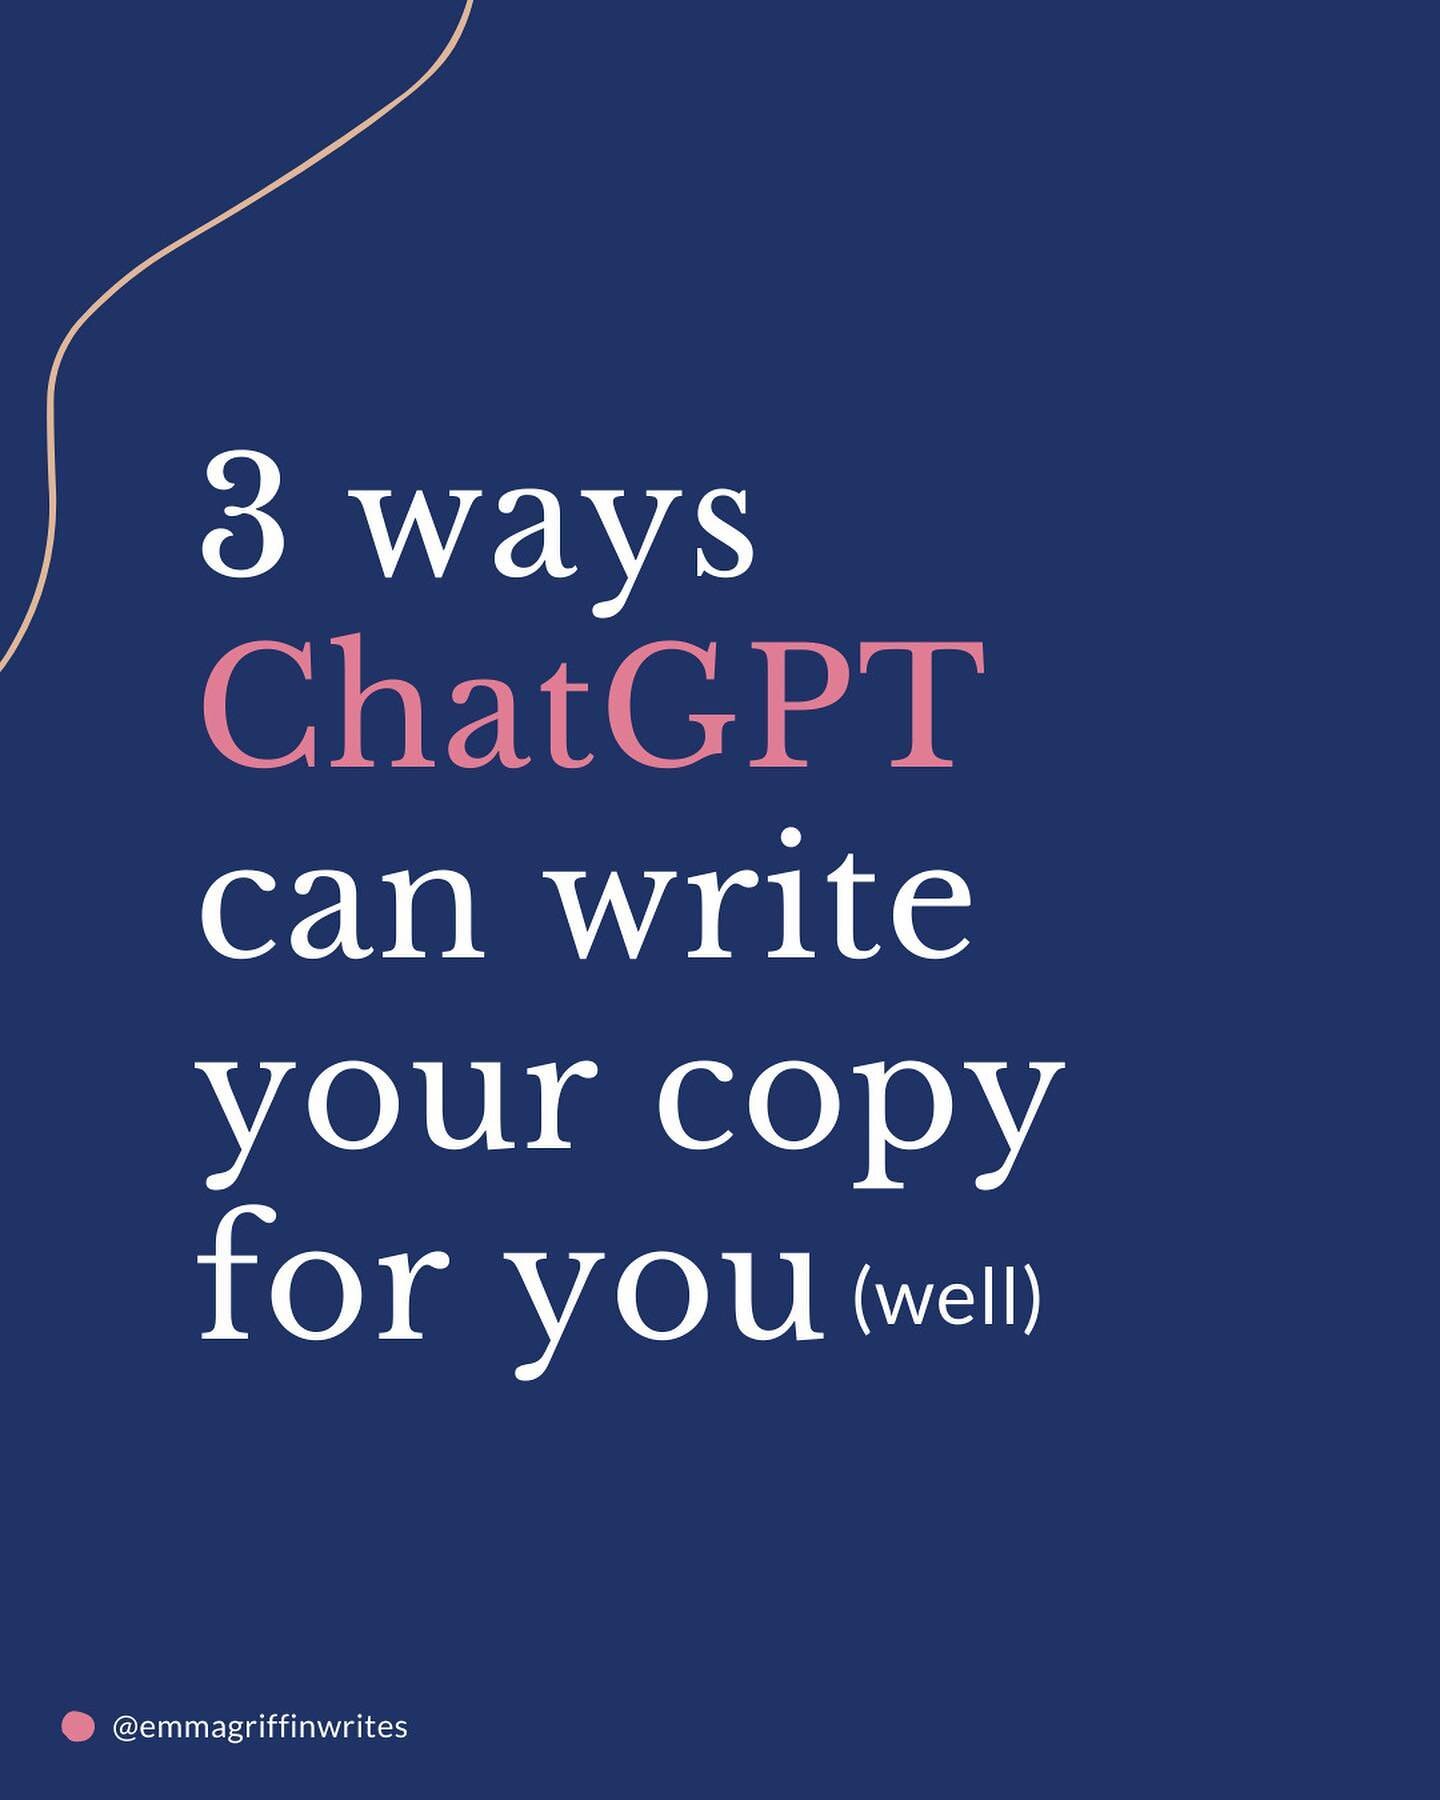 ChatGPT can't write all your copy for you.
⠀⠀⠀⠀⠀⠀⠀⠀⠀
But it can definitely help.
⠀⠀⠀⠀⠀⠀⠀⠀⠀
Here are a handful of ways I've been experimenting with it in my own business.
⠀⠀⠀⠀⠀⠀⠀⠀⠀
(I spilled many more ways to my email subscribers last week 💌).
⠀⠀⠀⠀⠀